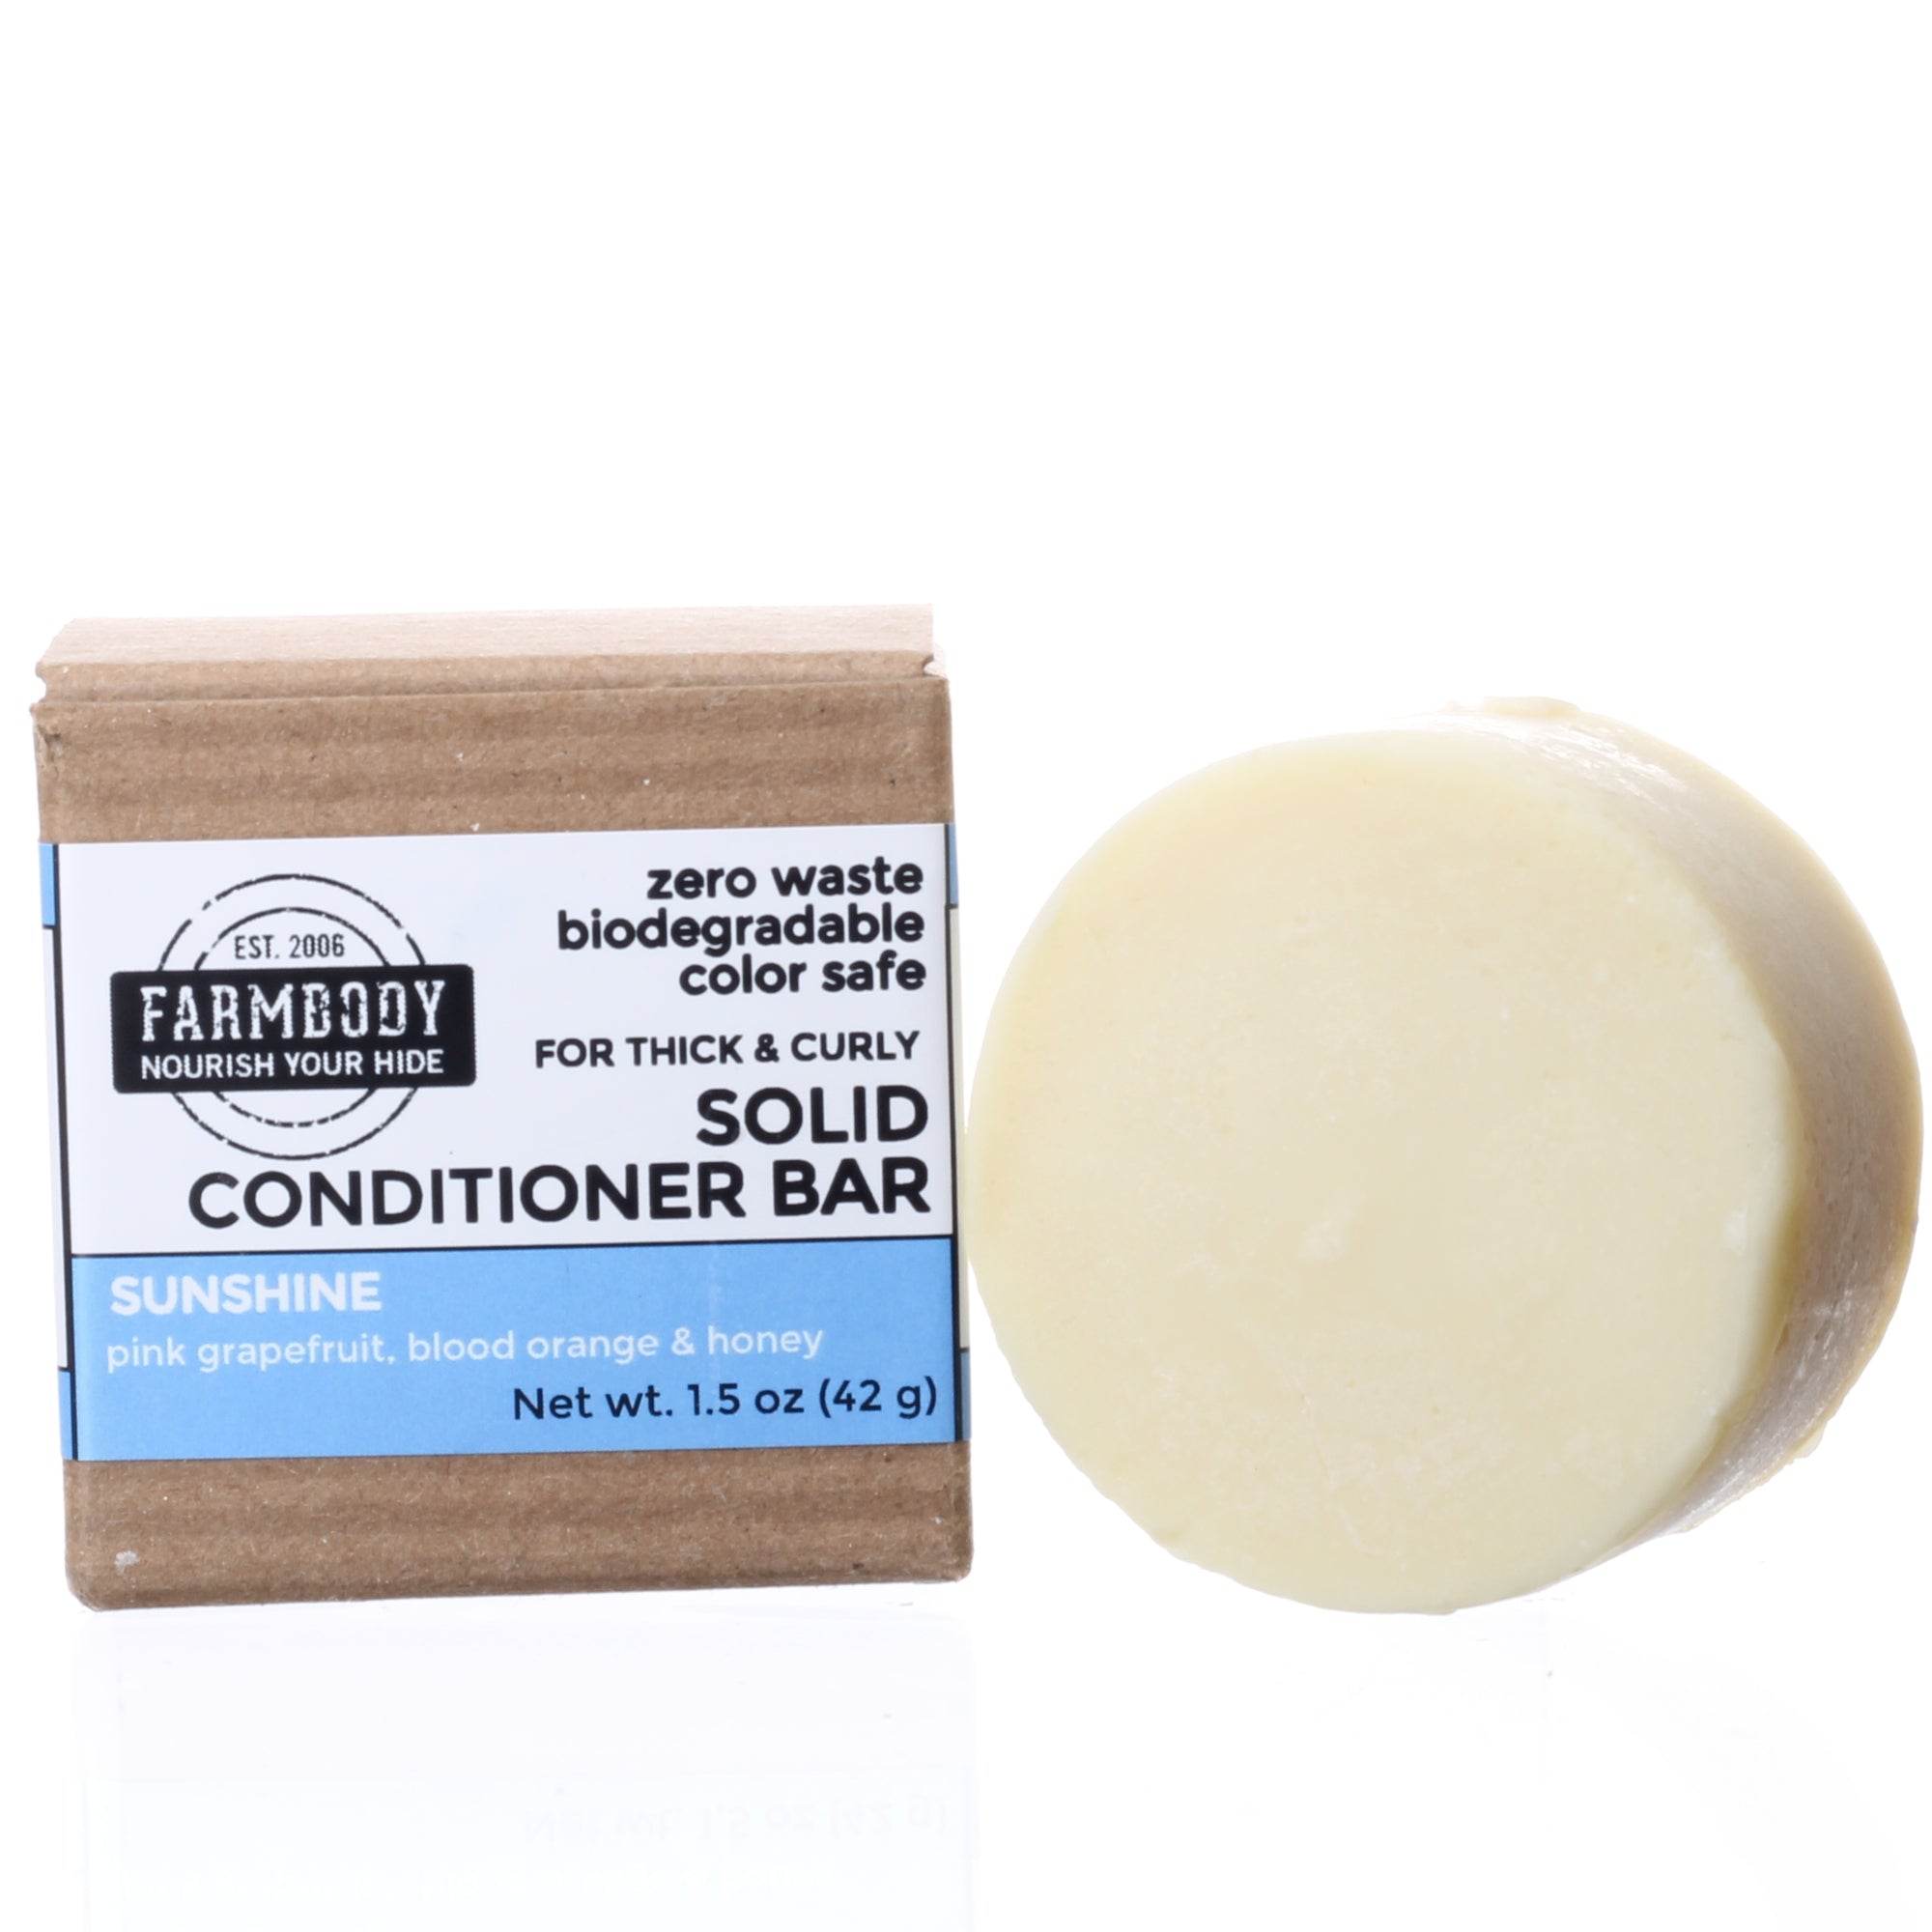 Farmbody Solid Conditioner bar best for thick curly ethnic hair with rapeseed oil hemp oil and hops